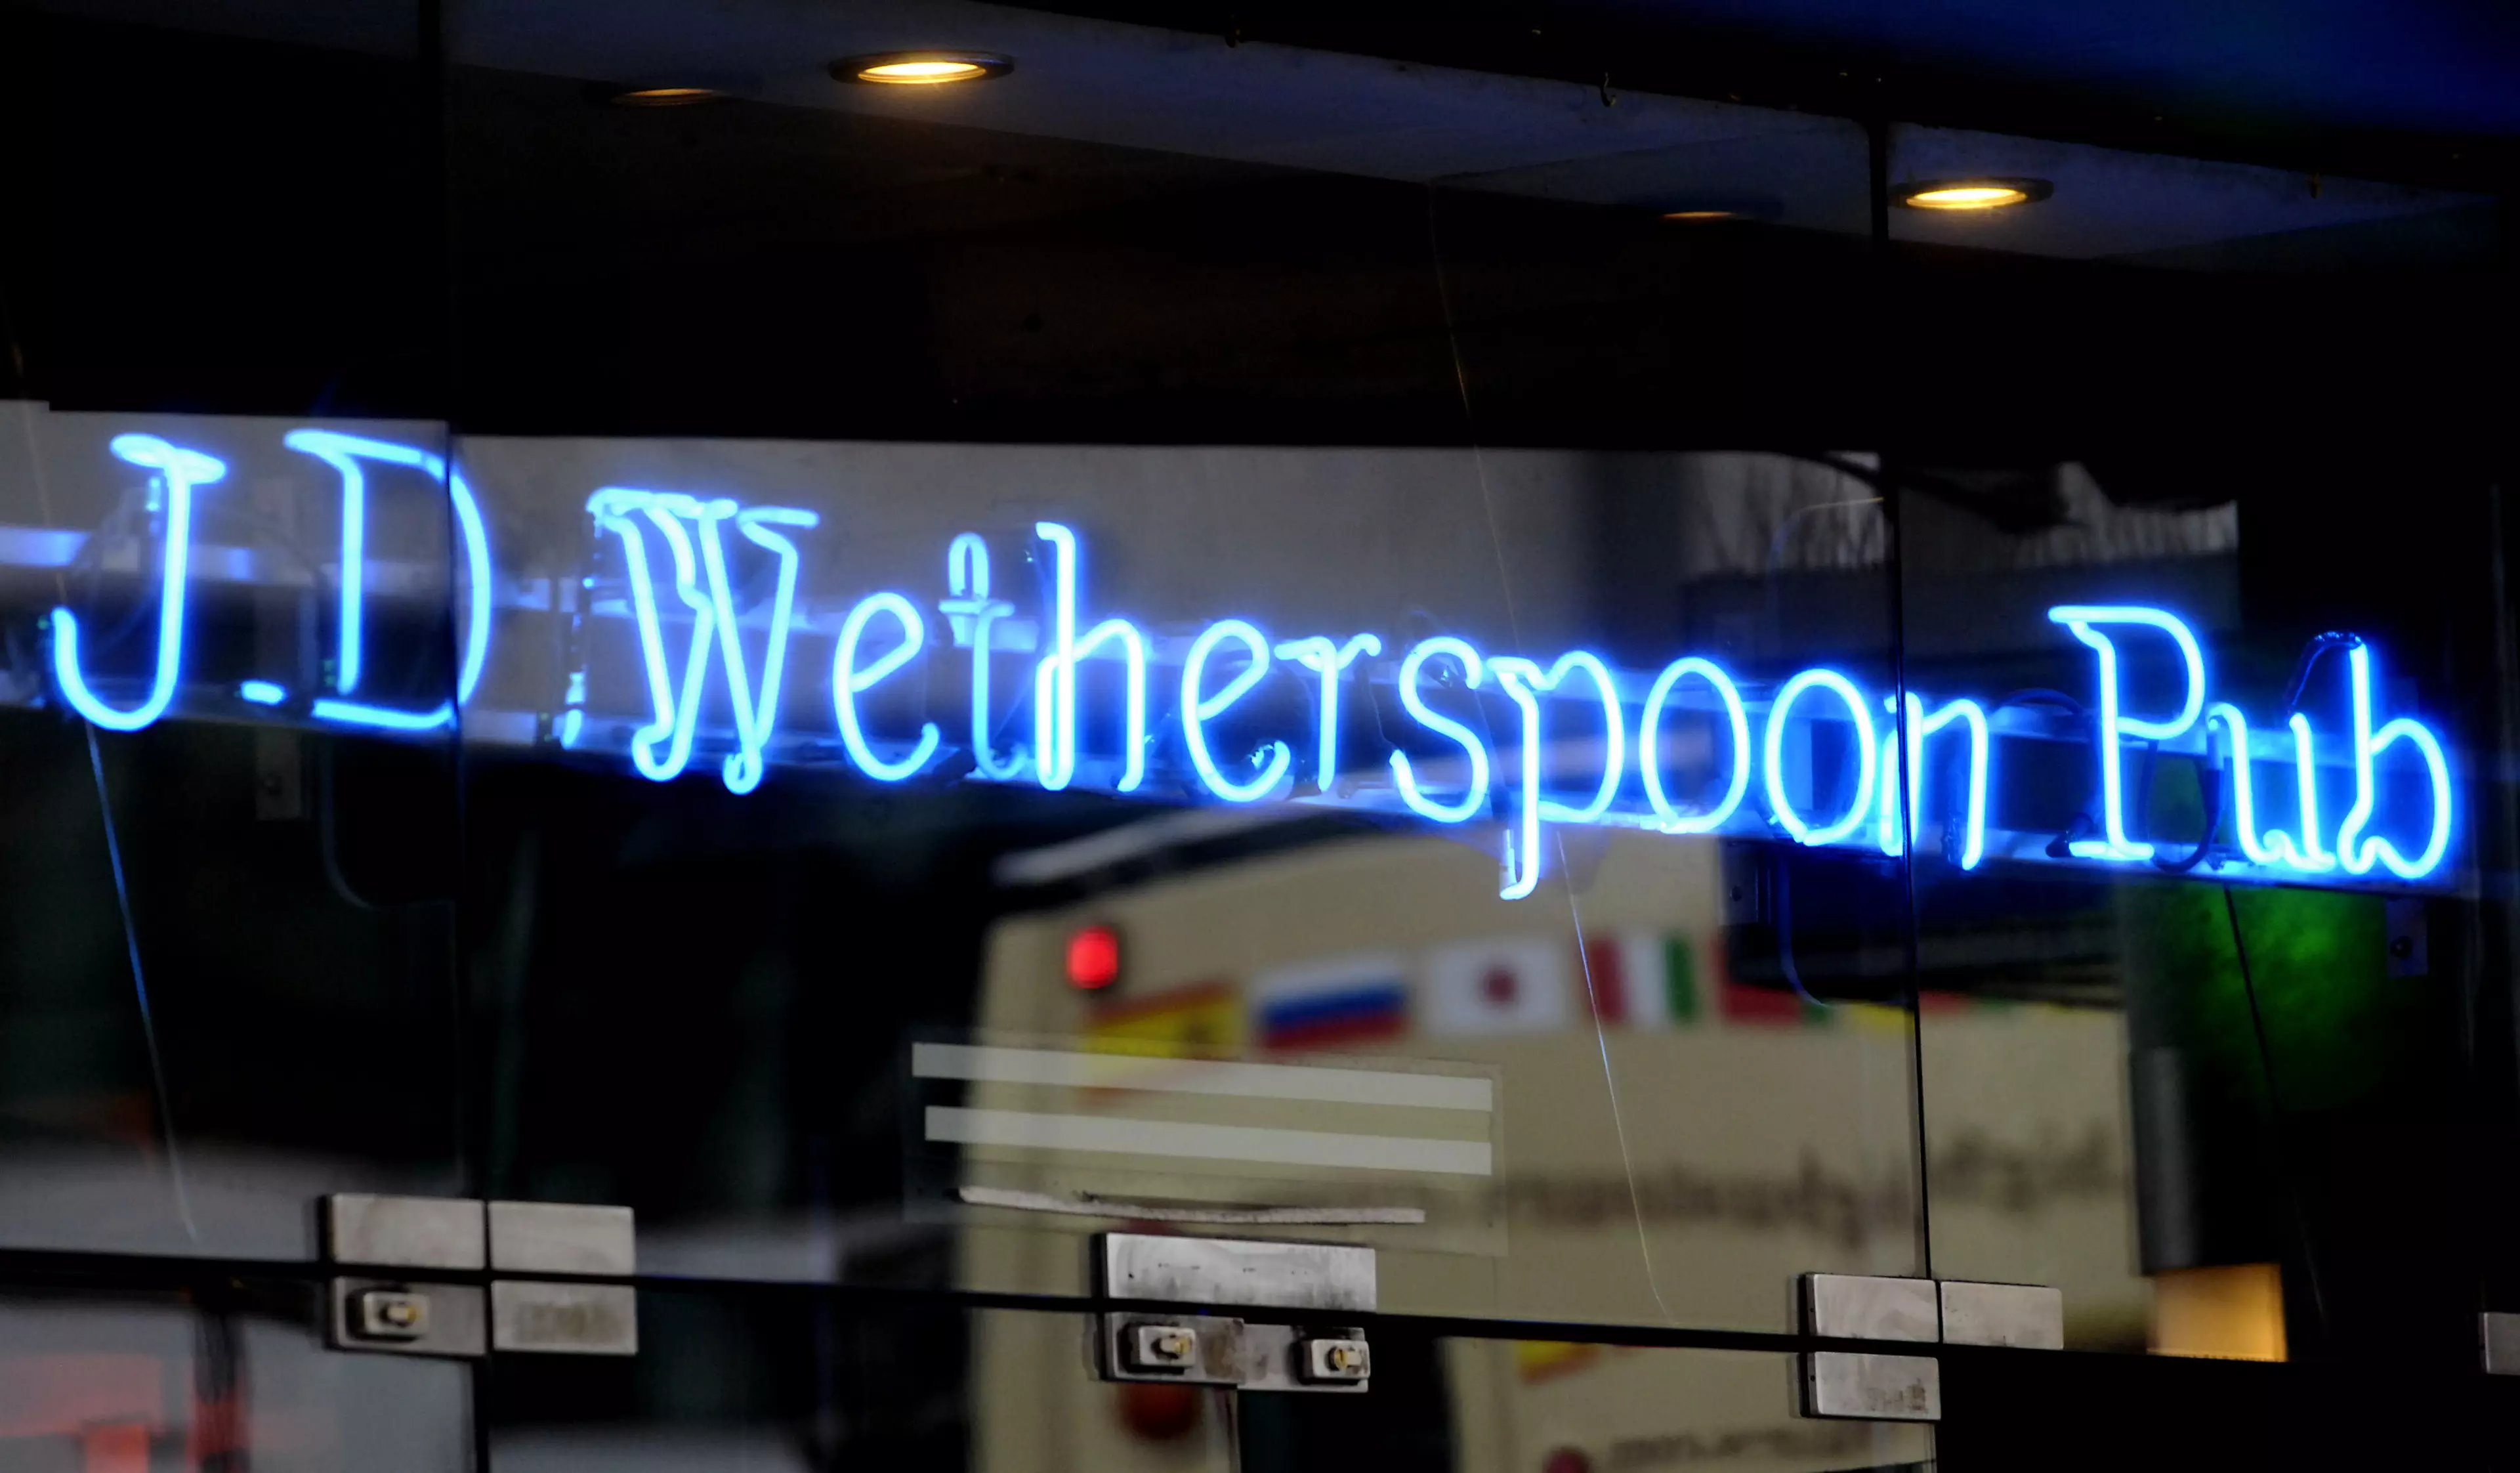 The cocktails are now available at Wetherspoon pubs (